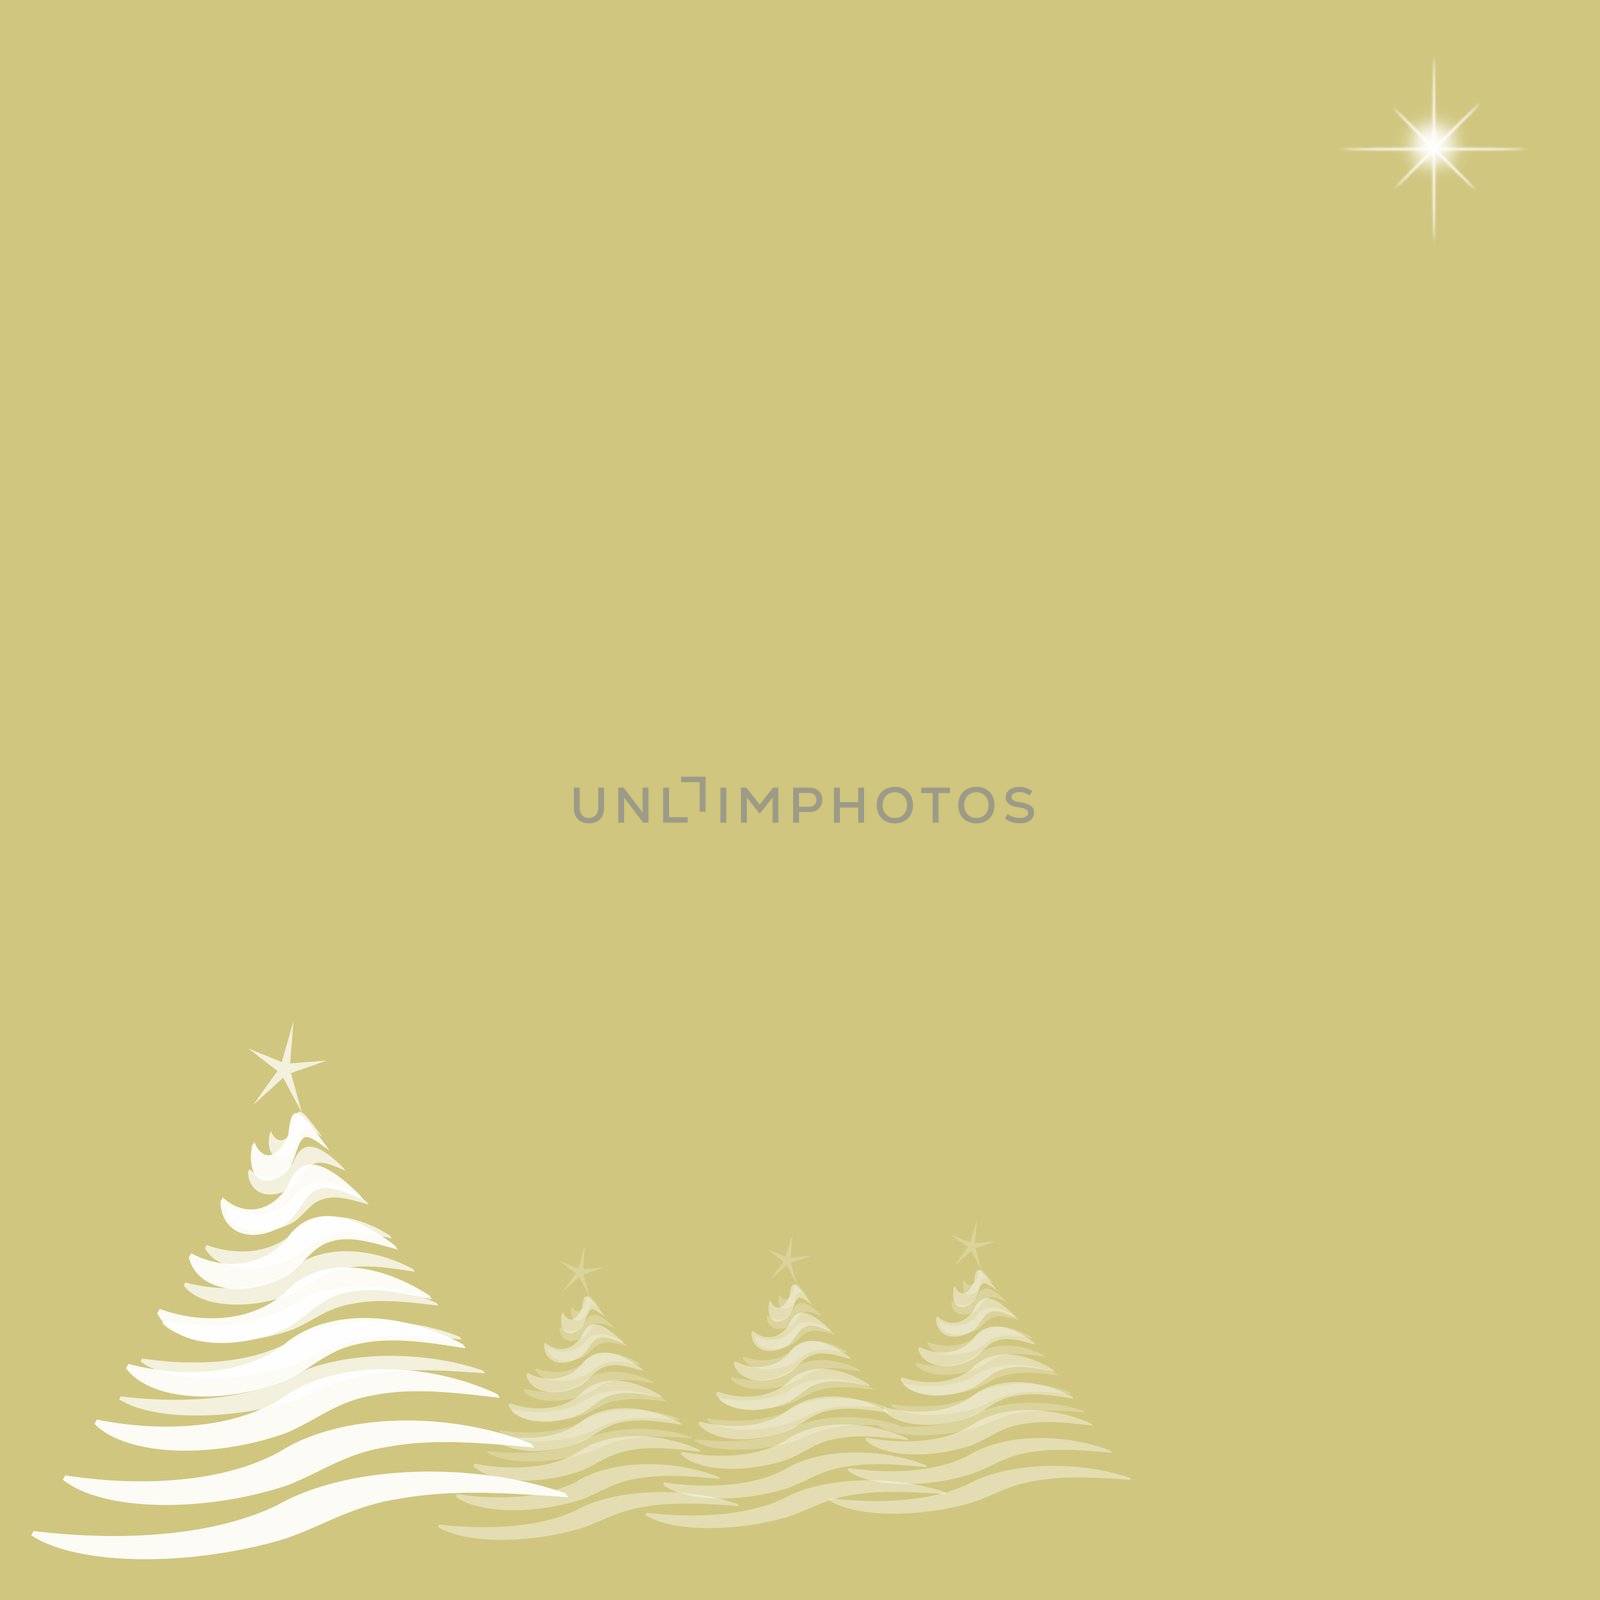 Abstract illustration with four white Christmas trees running from lower left, and one star at top right.  Gold background provides copy space.
